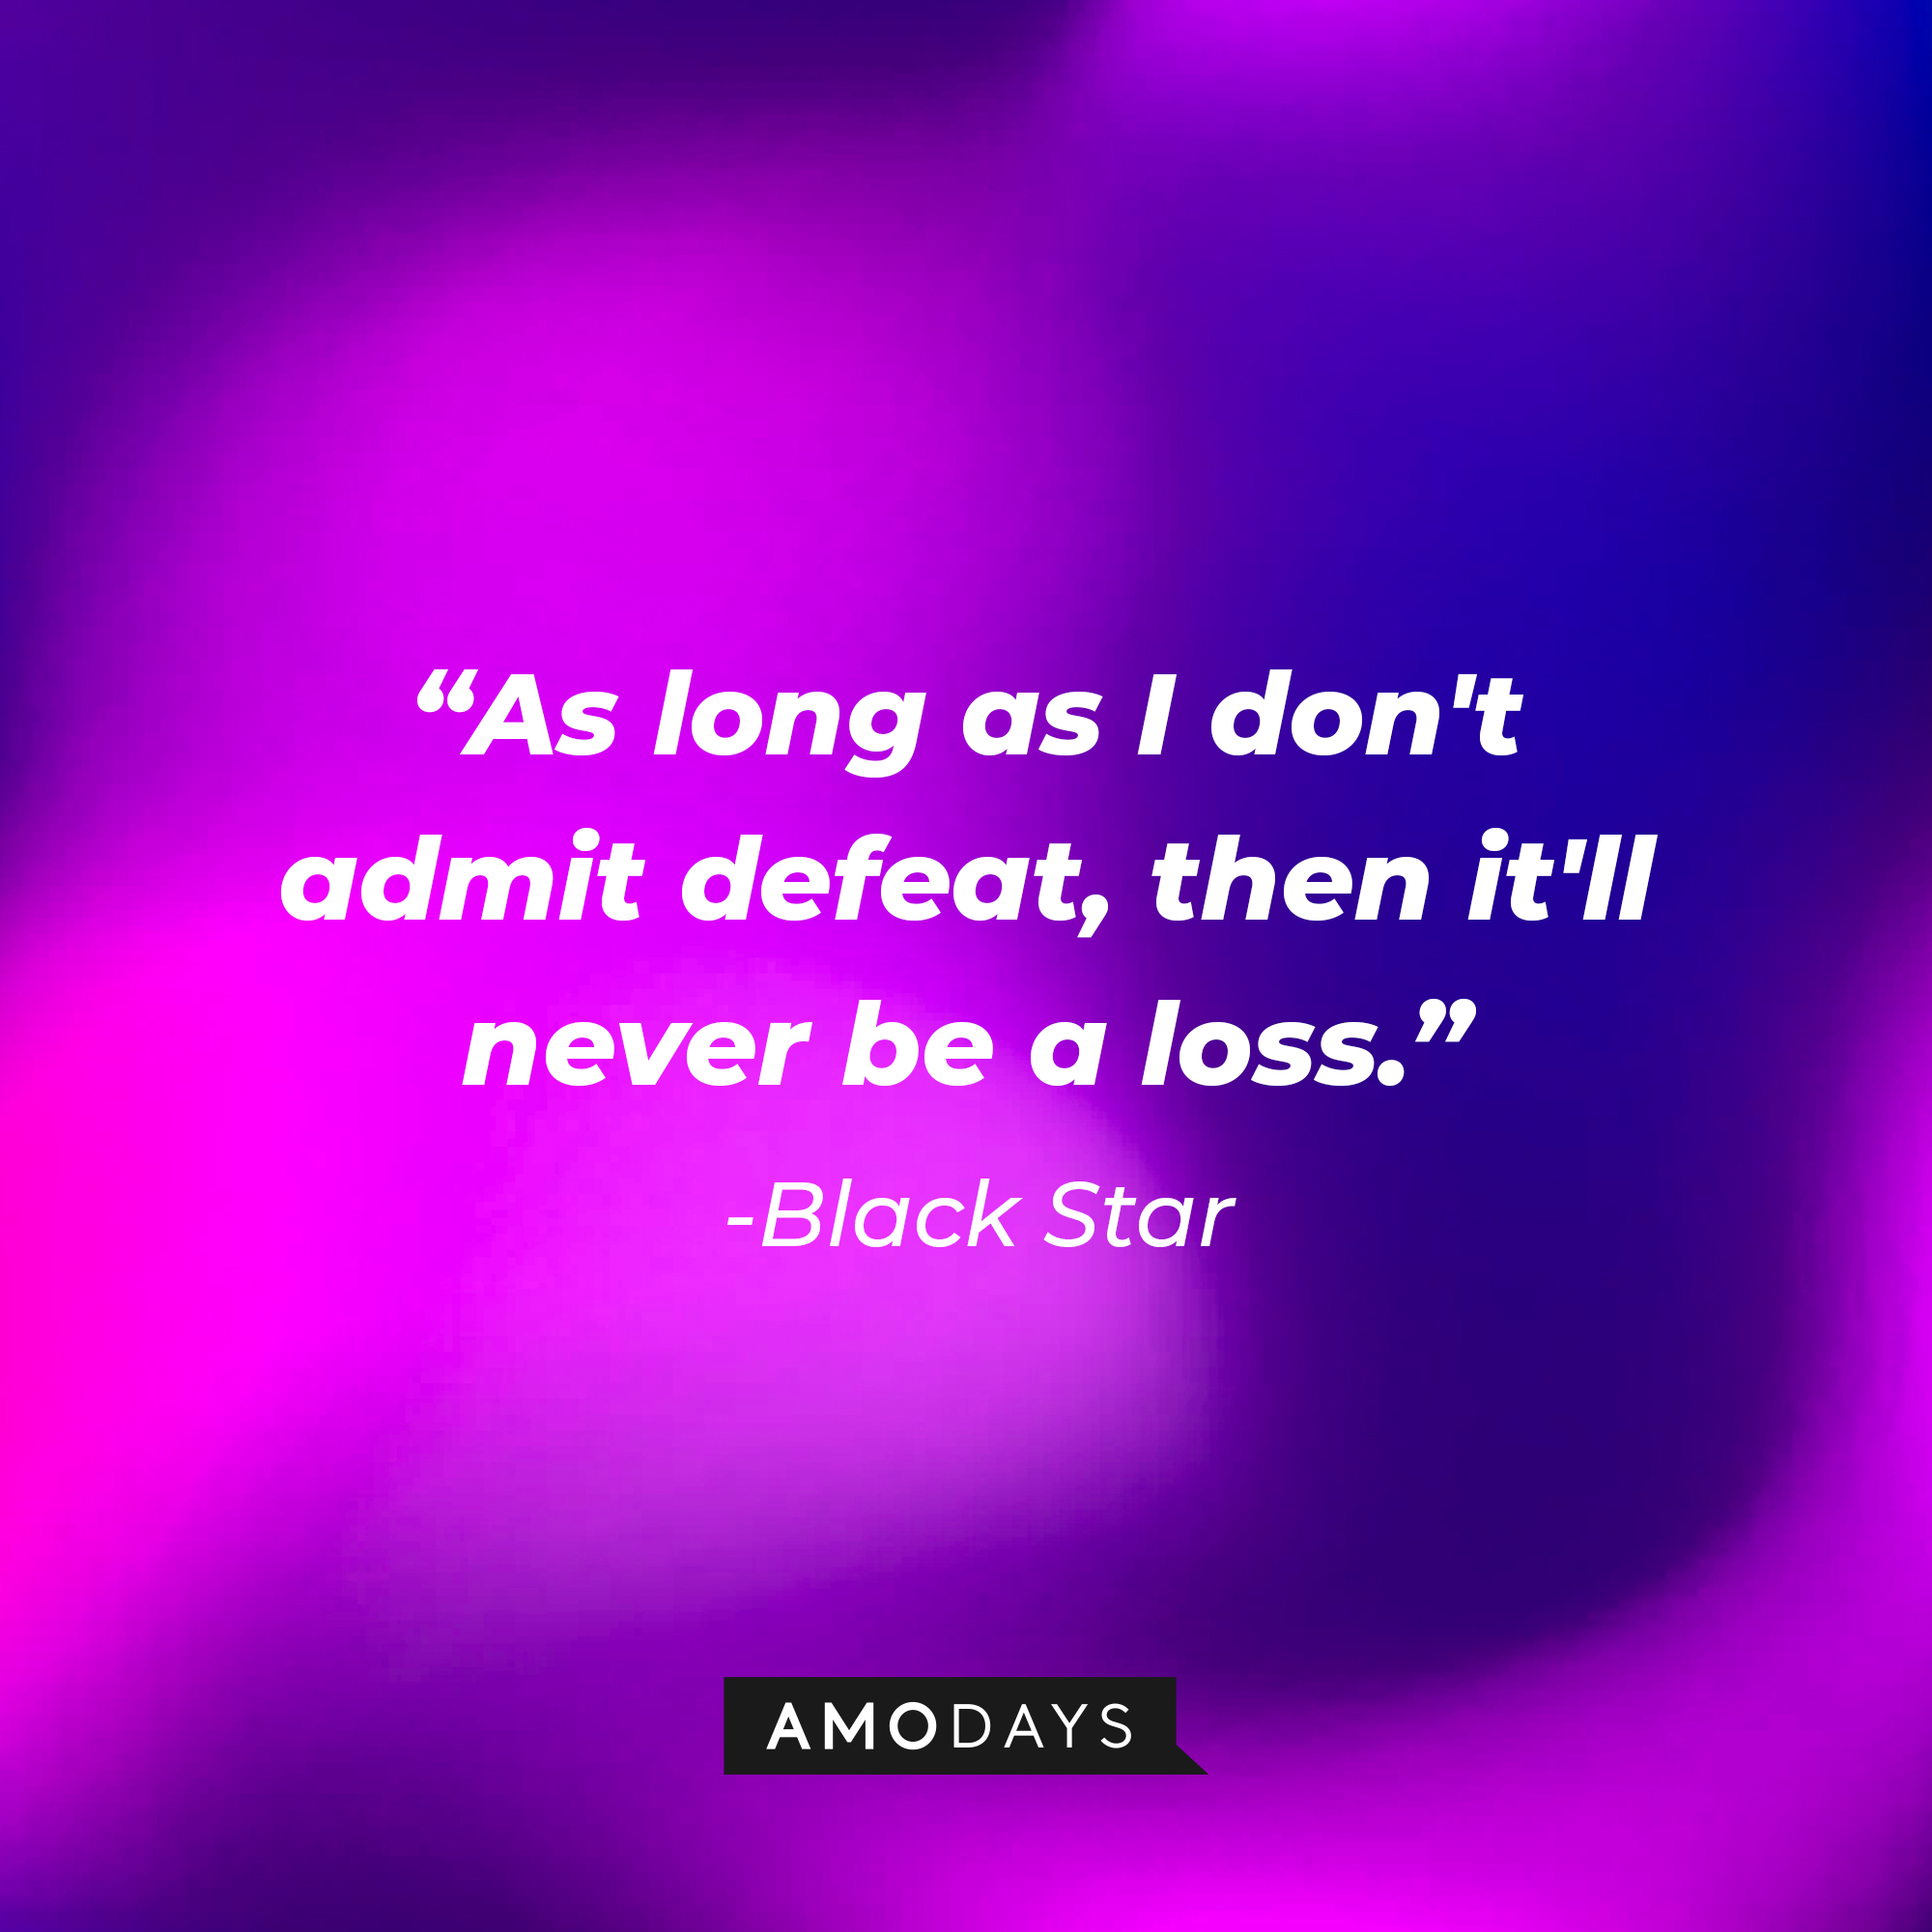 Black Star’s quote: "As long as I don't admit defeat, then it'll never be a loss." | Image: AmoDays